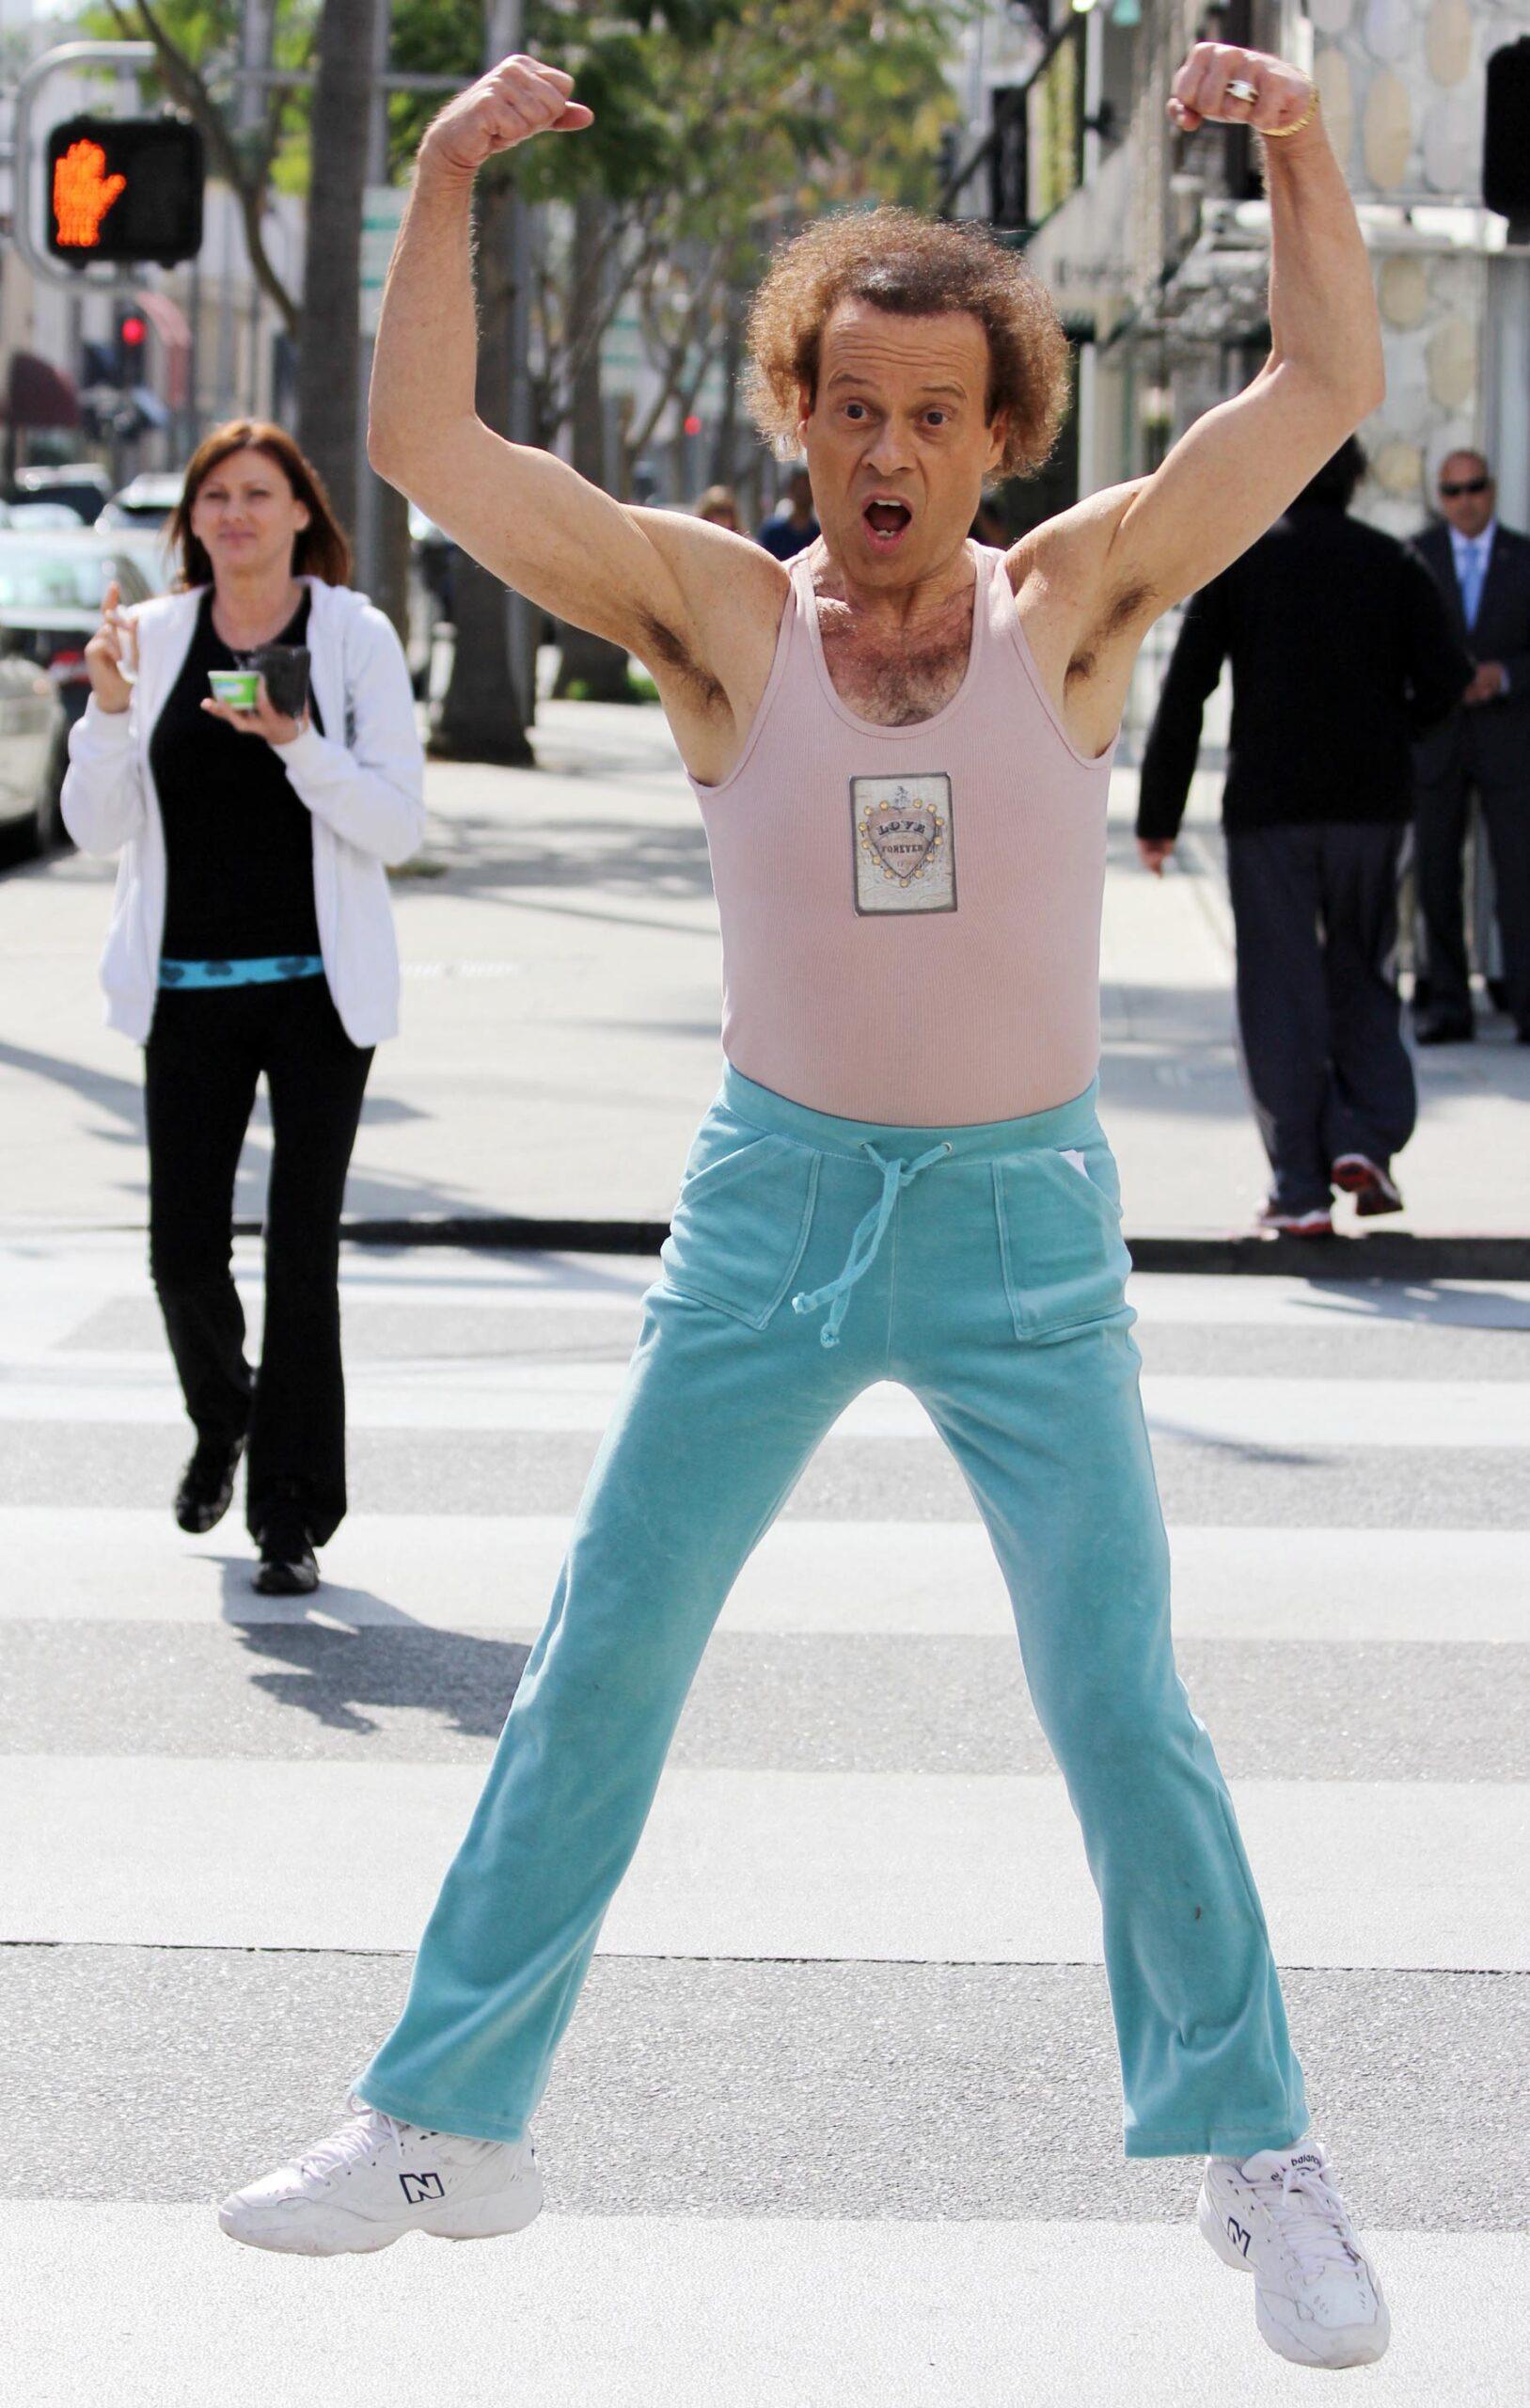 Richard Simmons Worries Fans With Cryptic Post: 'I Am... Dying'